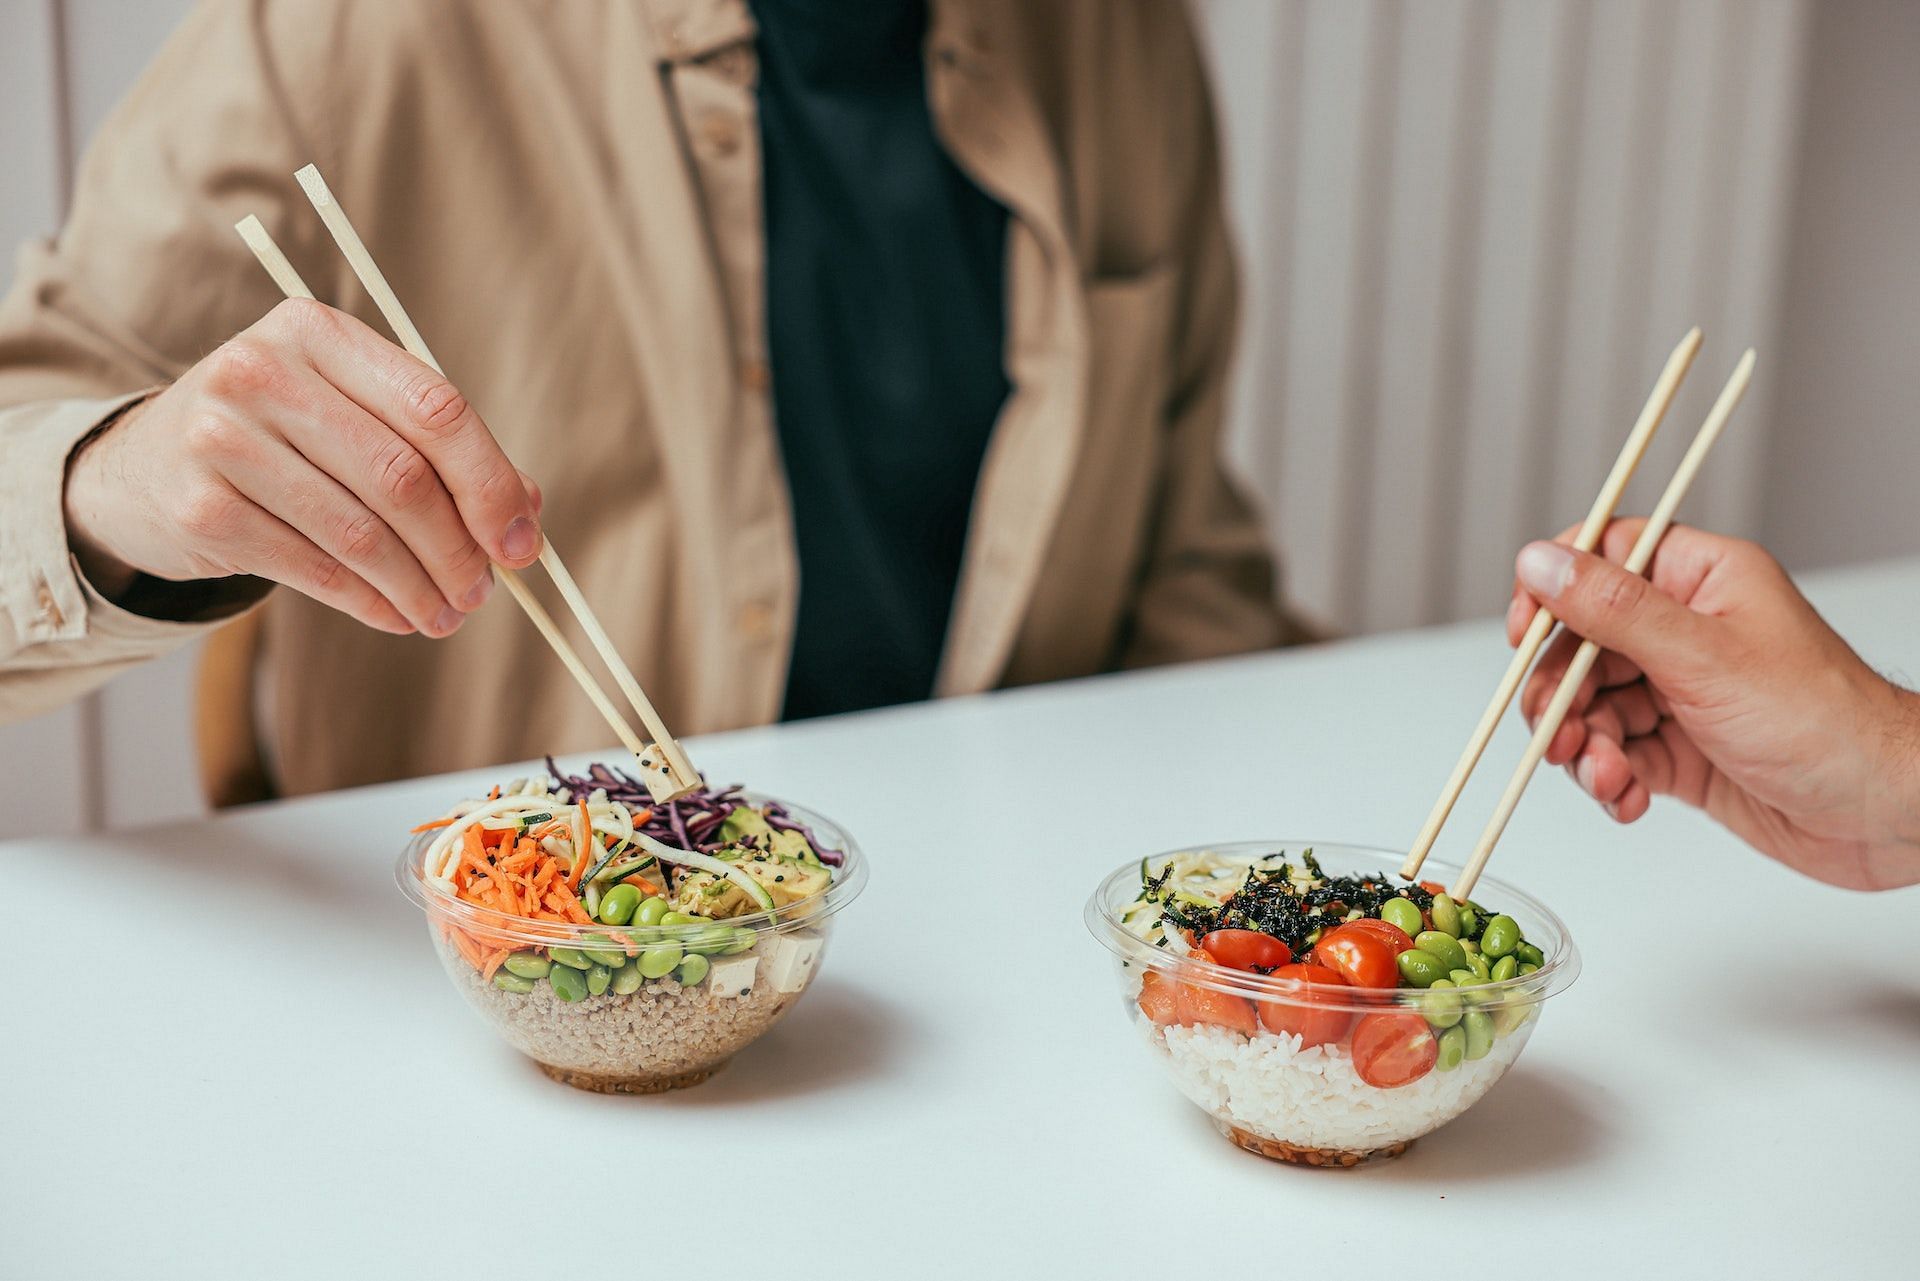 Edamame is best enjoyed as a salad. (Image via Pexels/Cup of Couple)